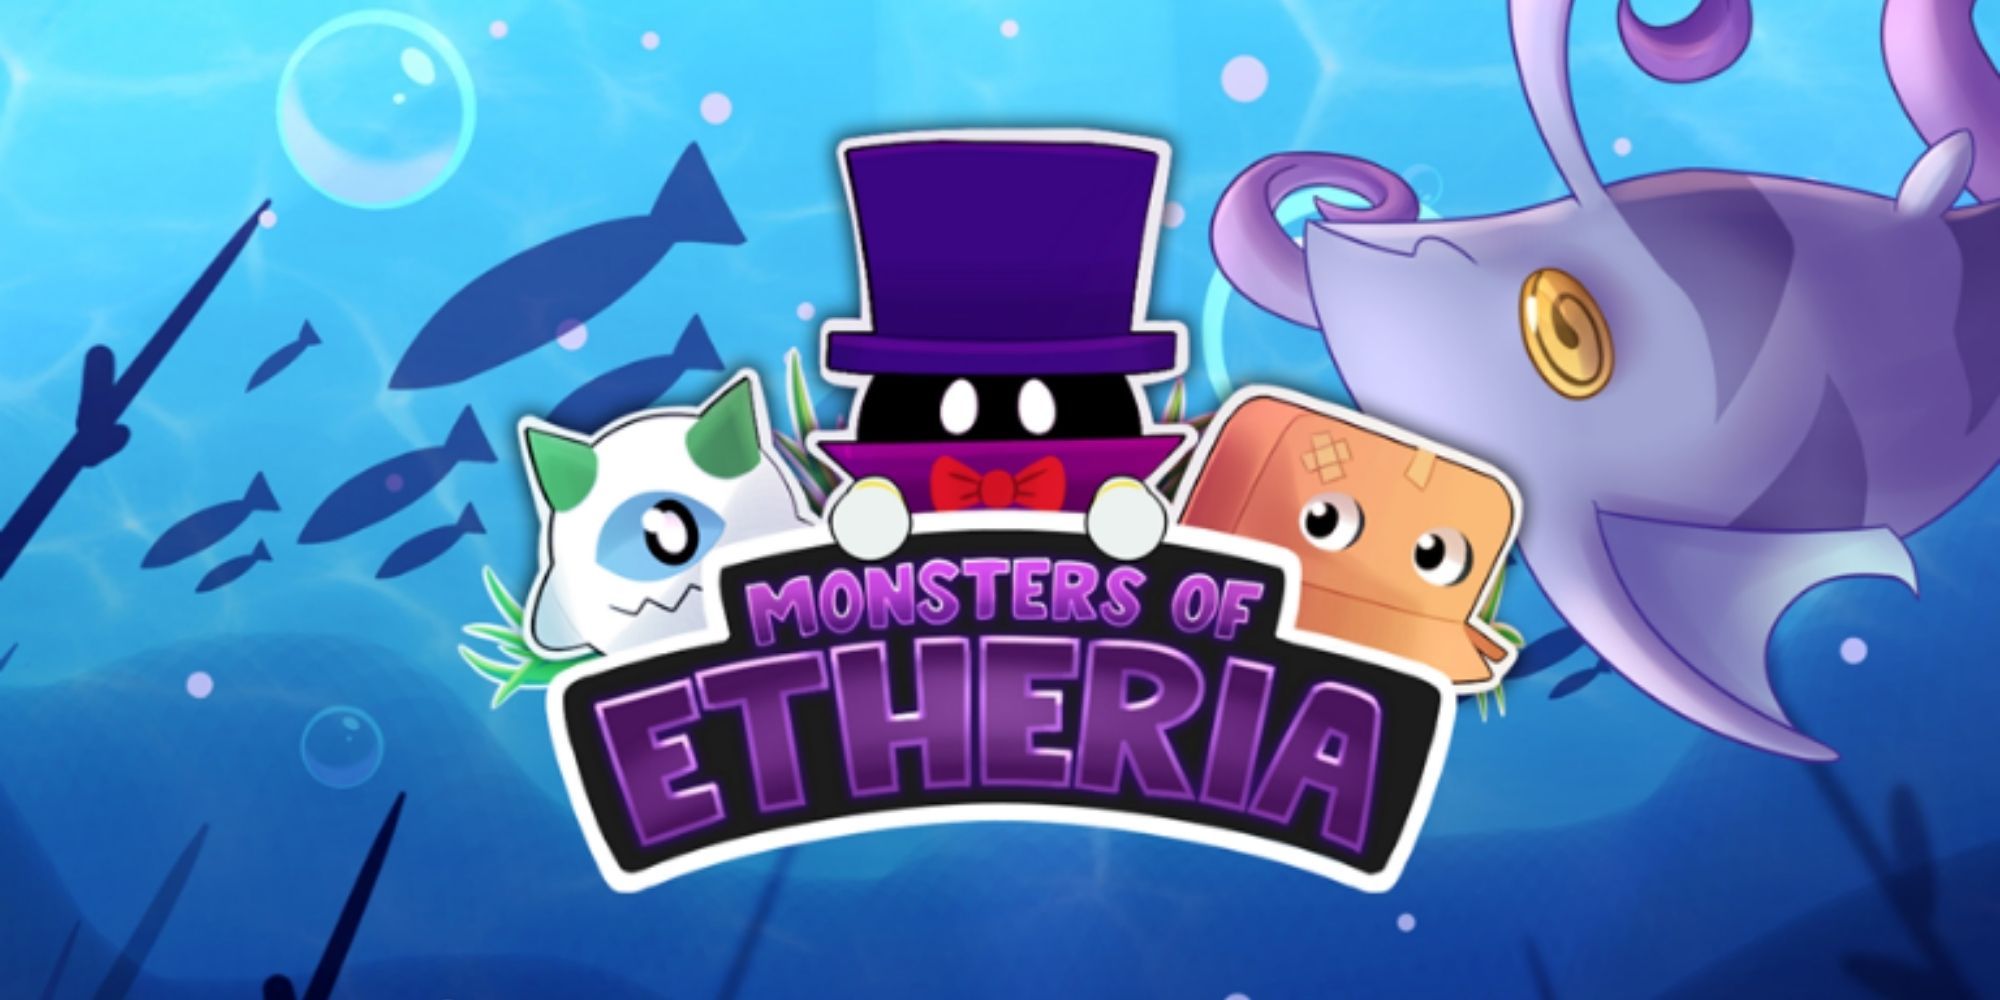 Image still of various Etherians from Roblox game Monsters of Etheria. 